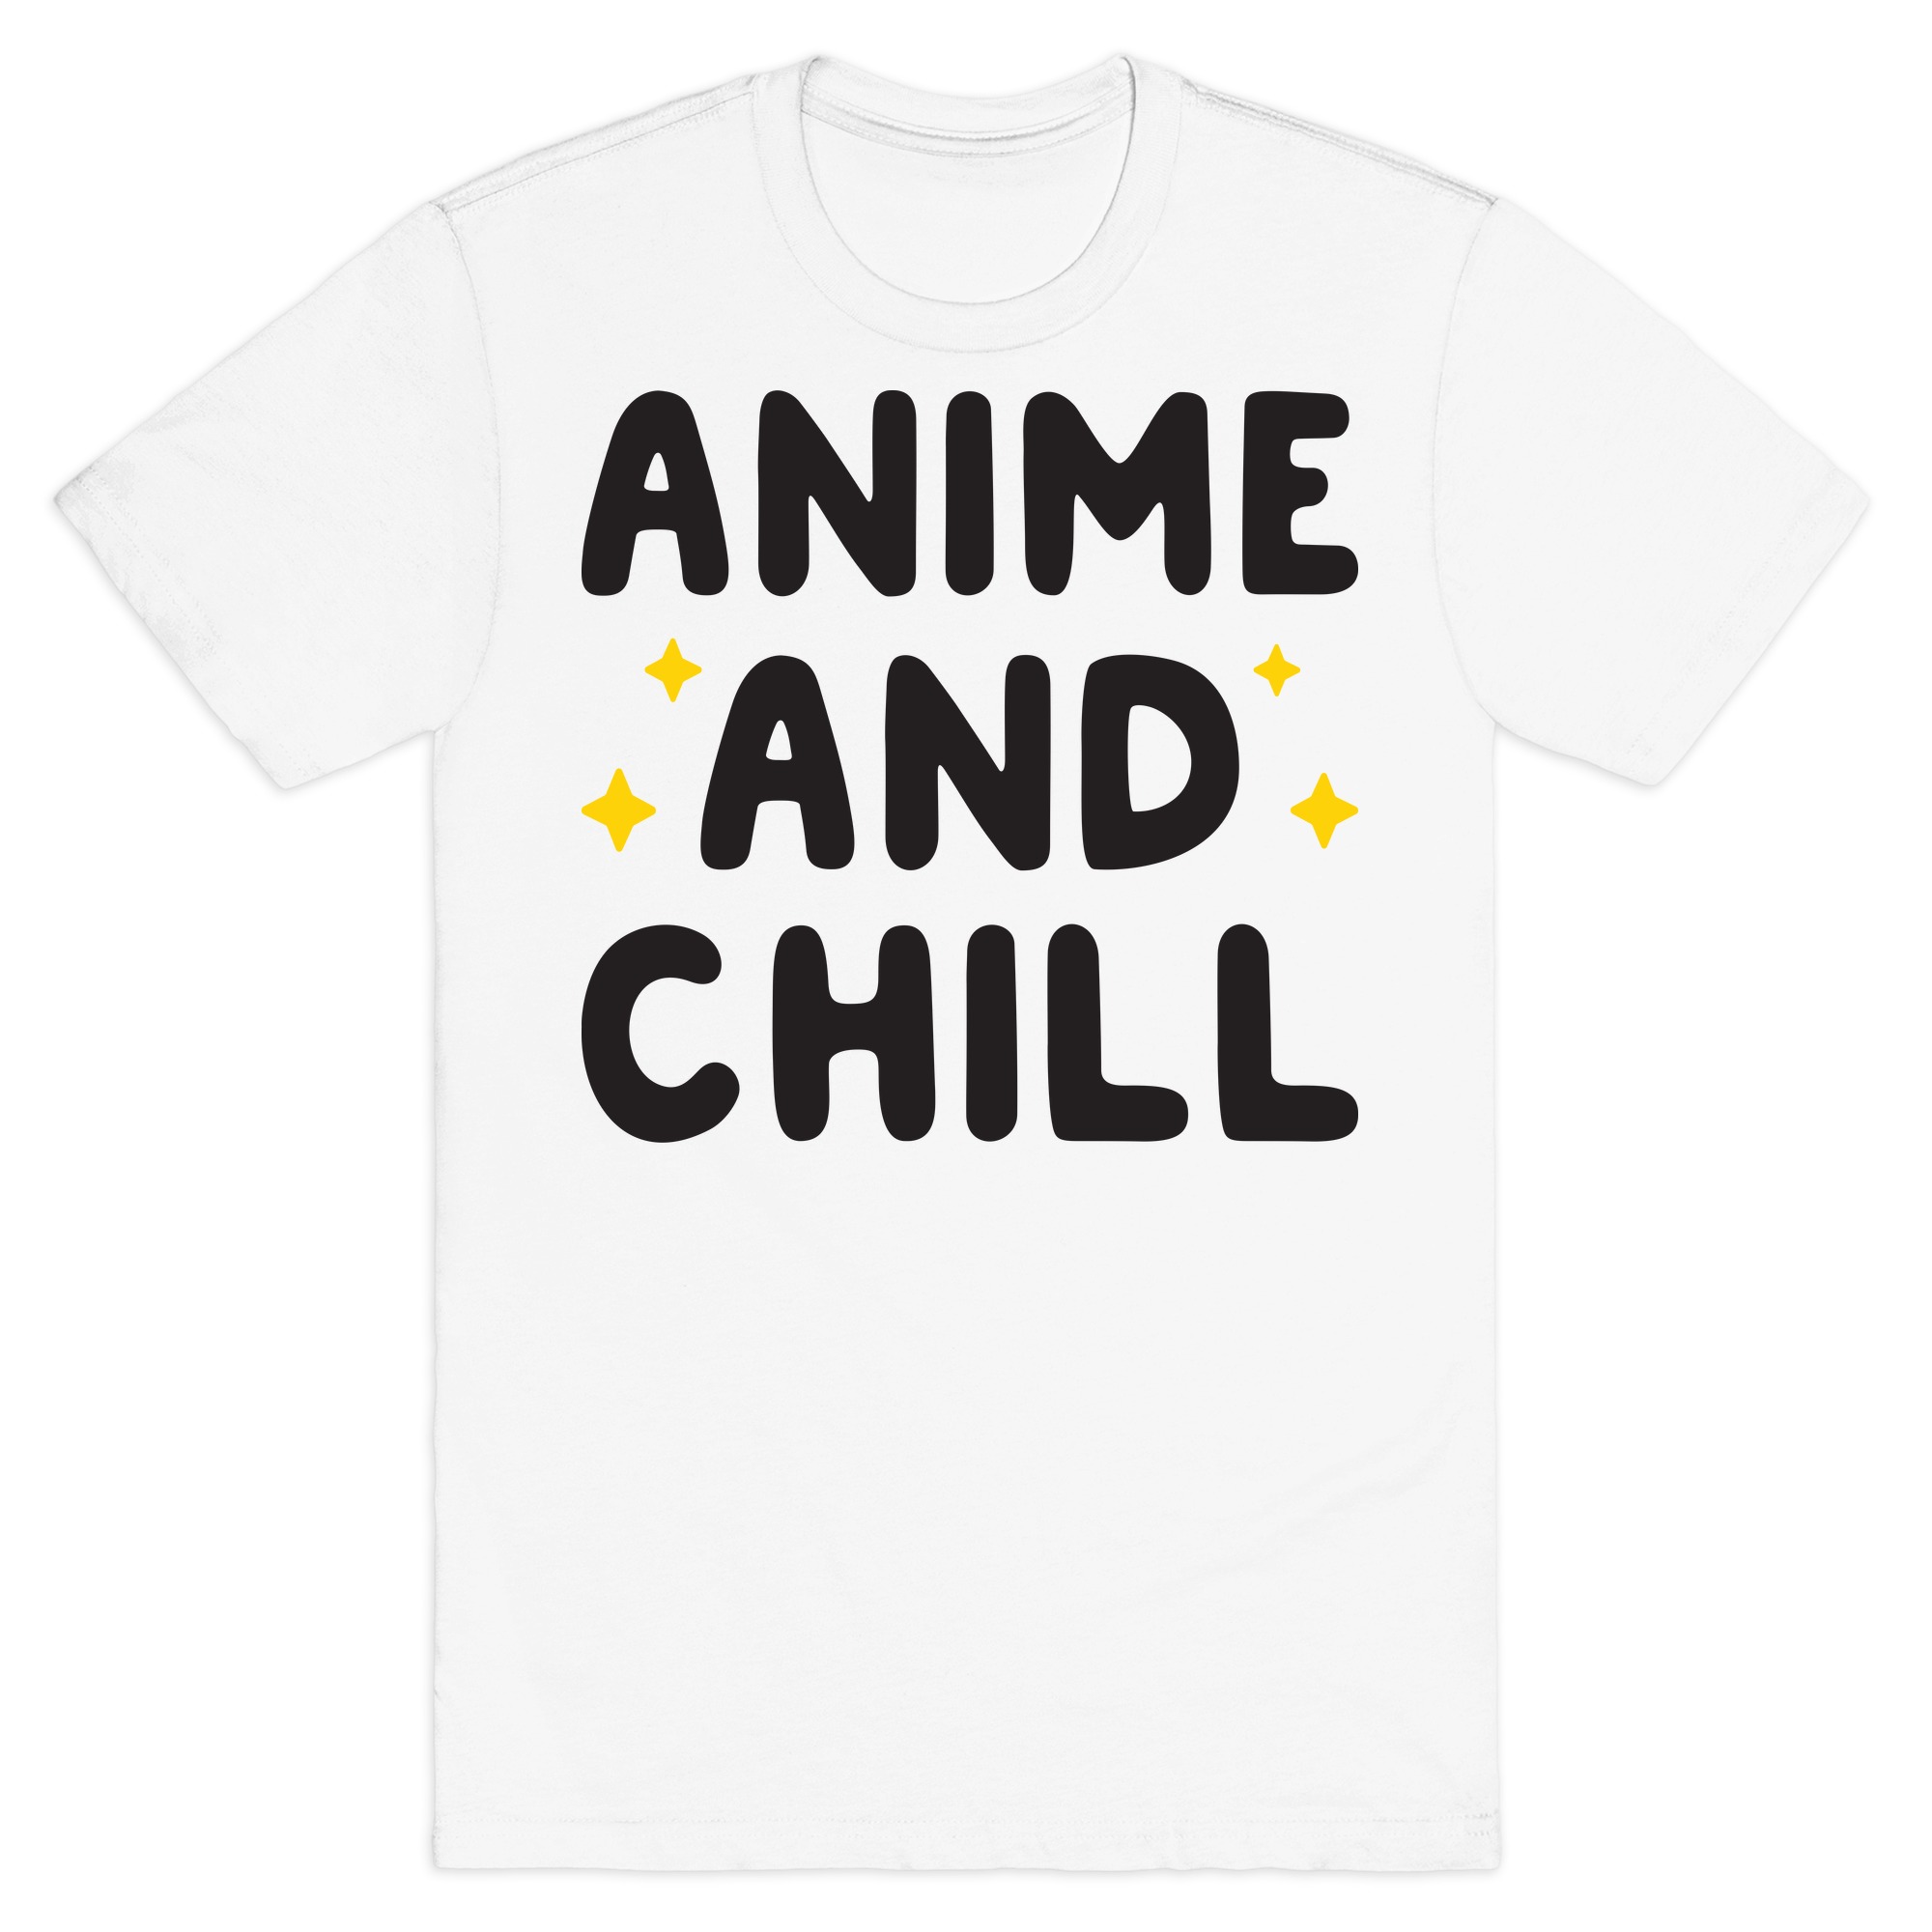 Anime And Chill T Shirts Lookhuman The best gifs are on giphy. anime and chill t shirts lookhuman